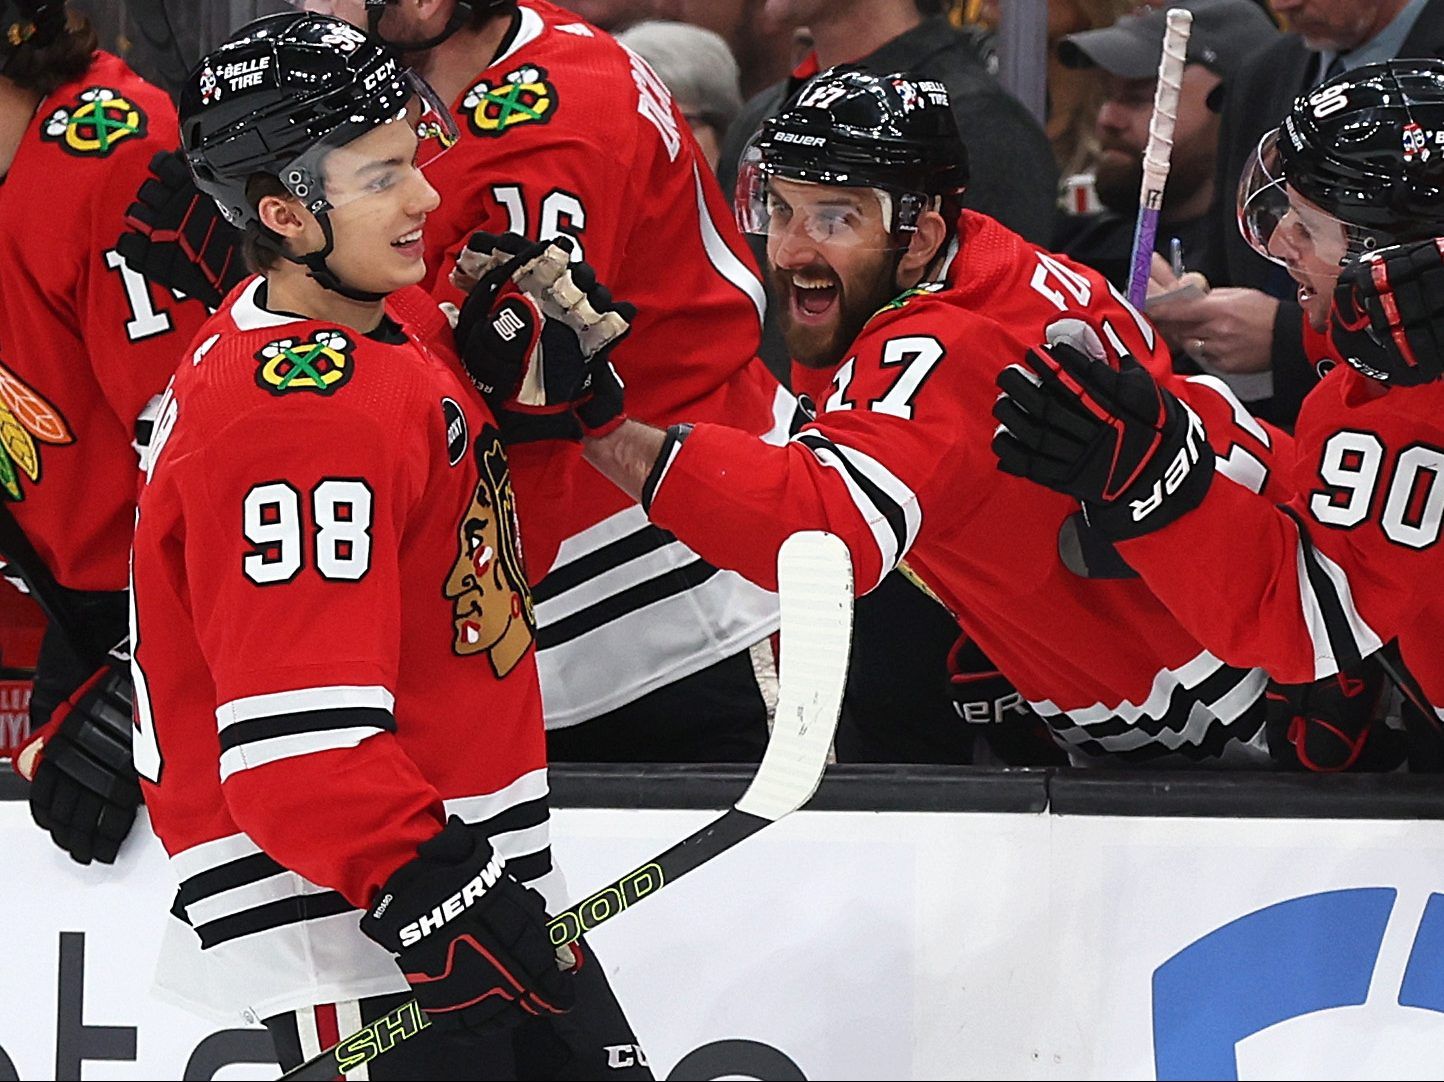 Comments from Blackhawks' locker room after Game 4 win